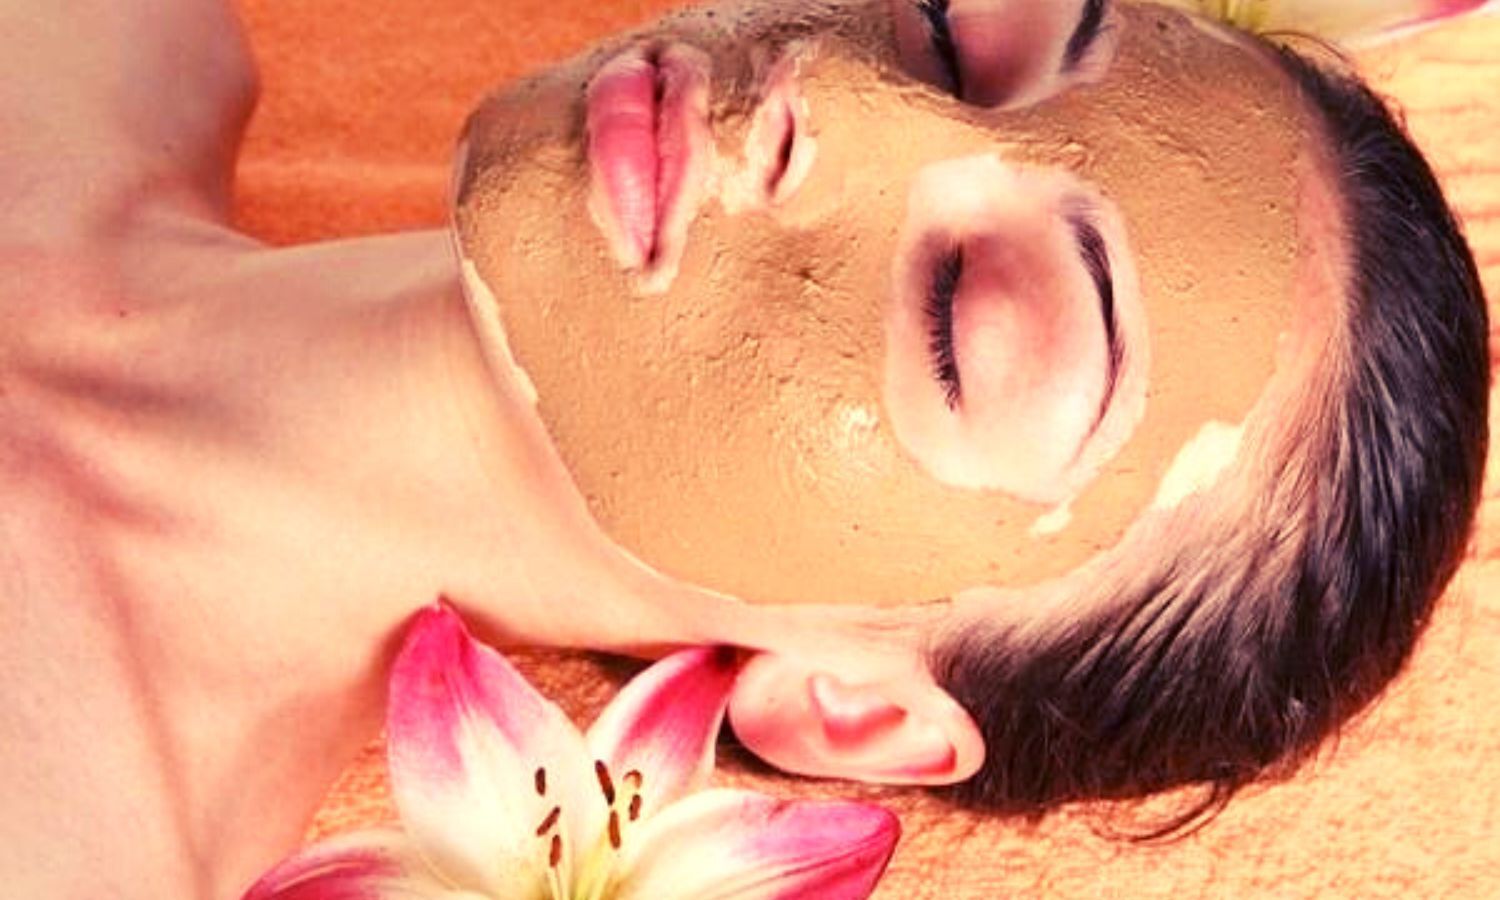 Lily Flower Facepack: If you want glowing skin then try a face pack made from lily flowers